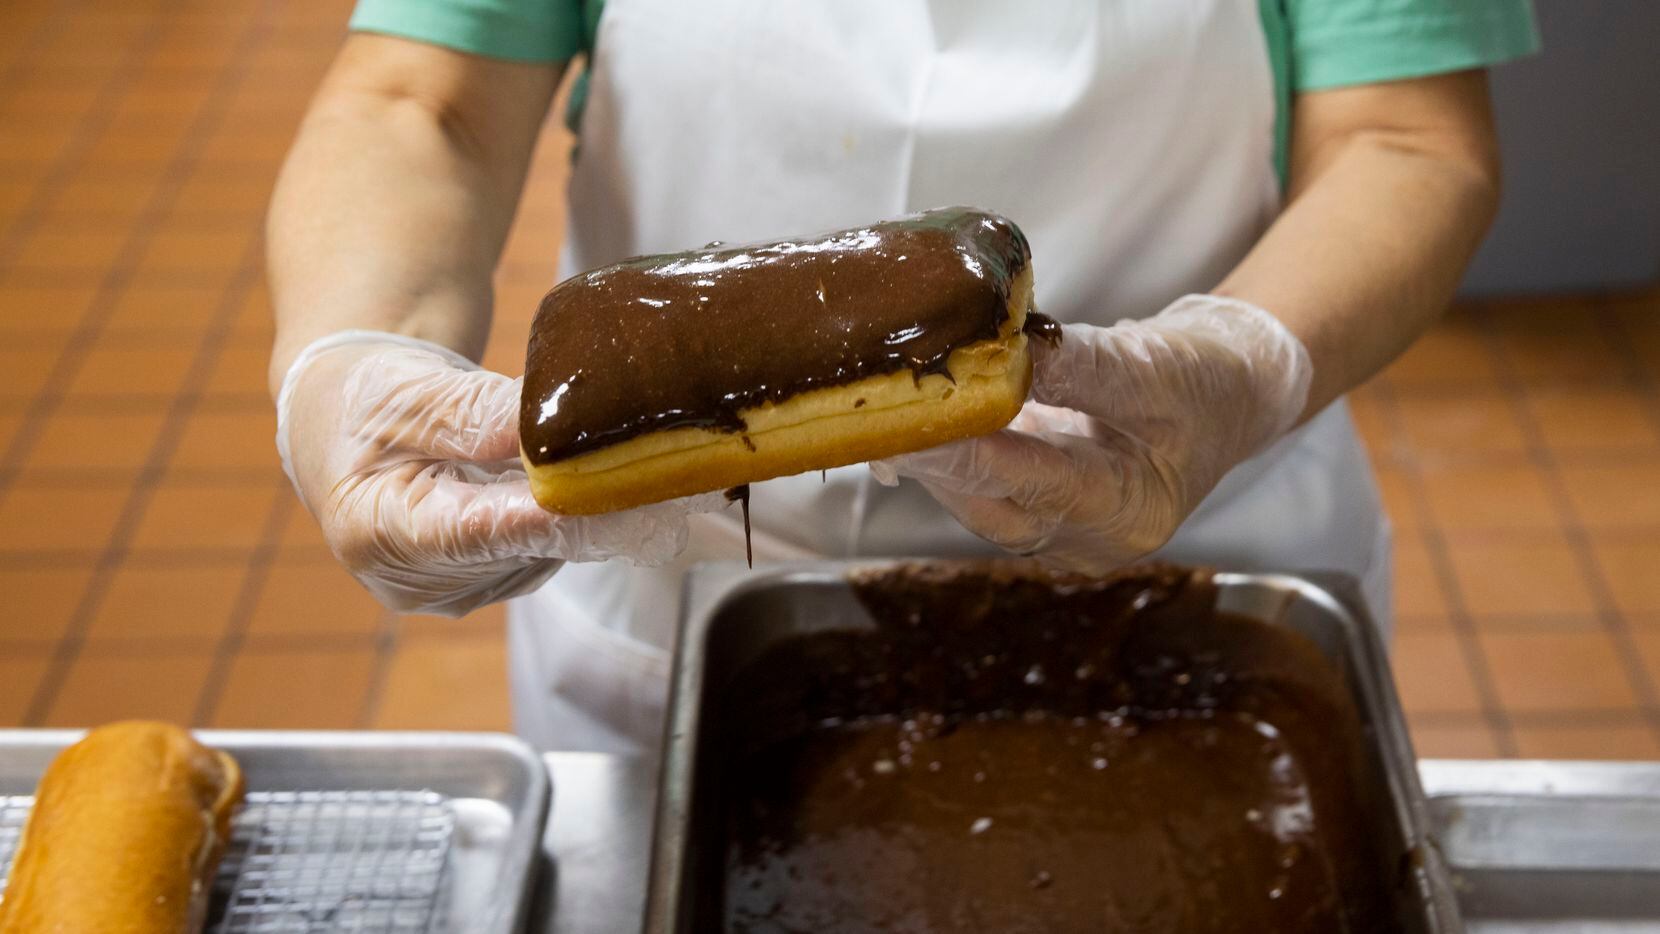 Maria Mendoza, who has been working at Lone Star Donuts for over 30 years, glazes a...